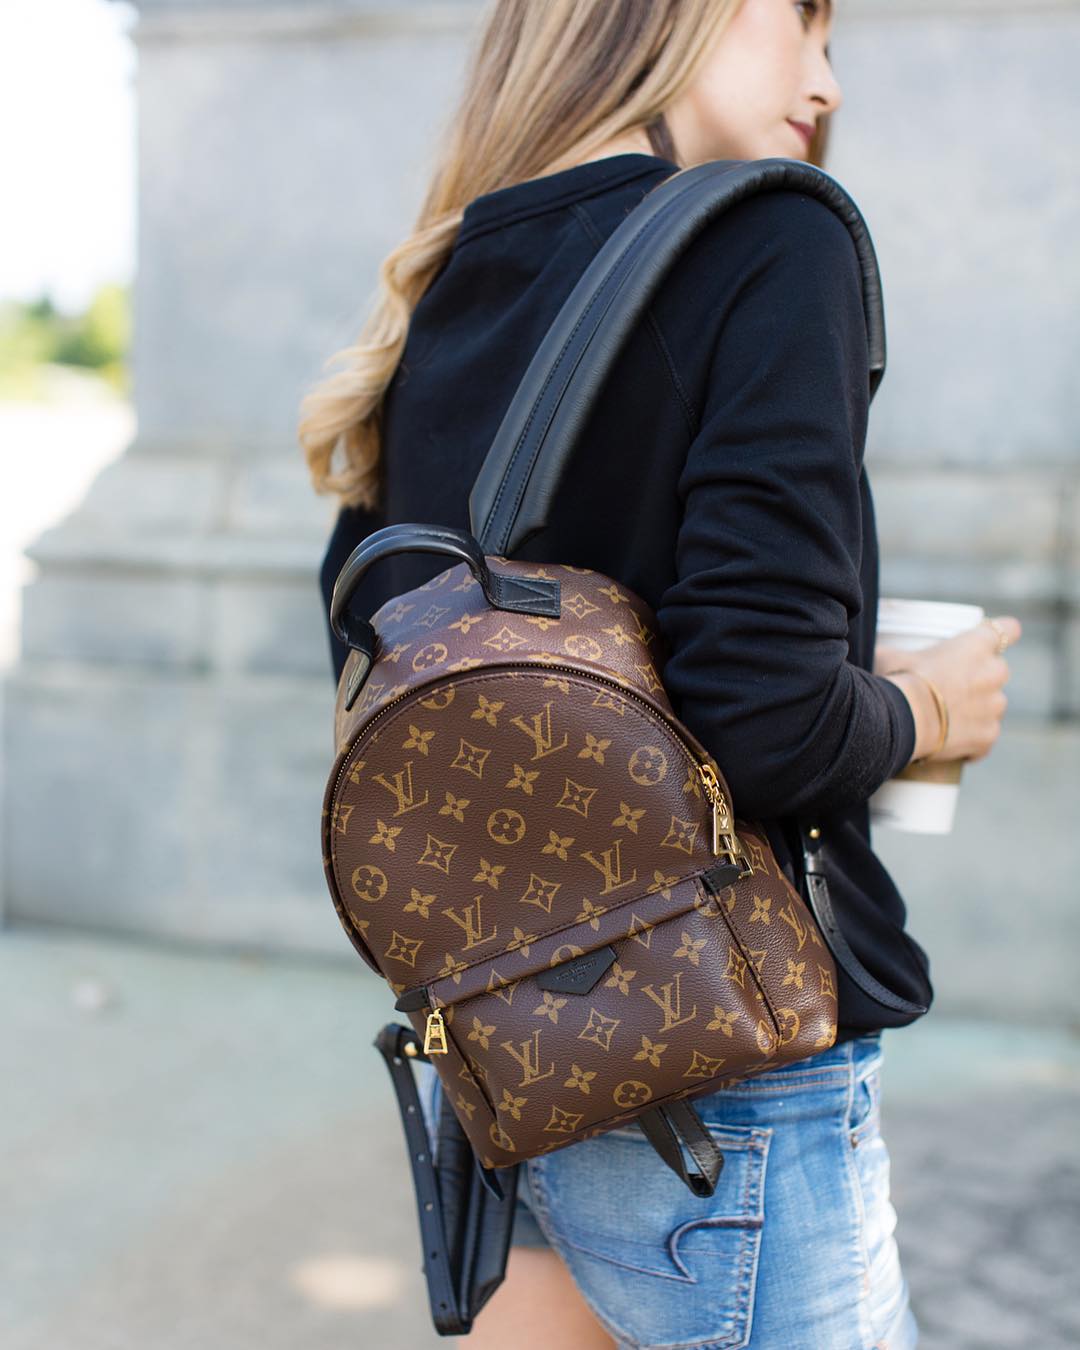 Top 10 Best Designer Backpacks For Urban Commuters (+ What Fits